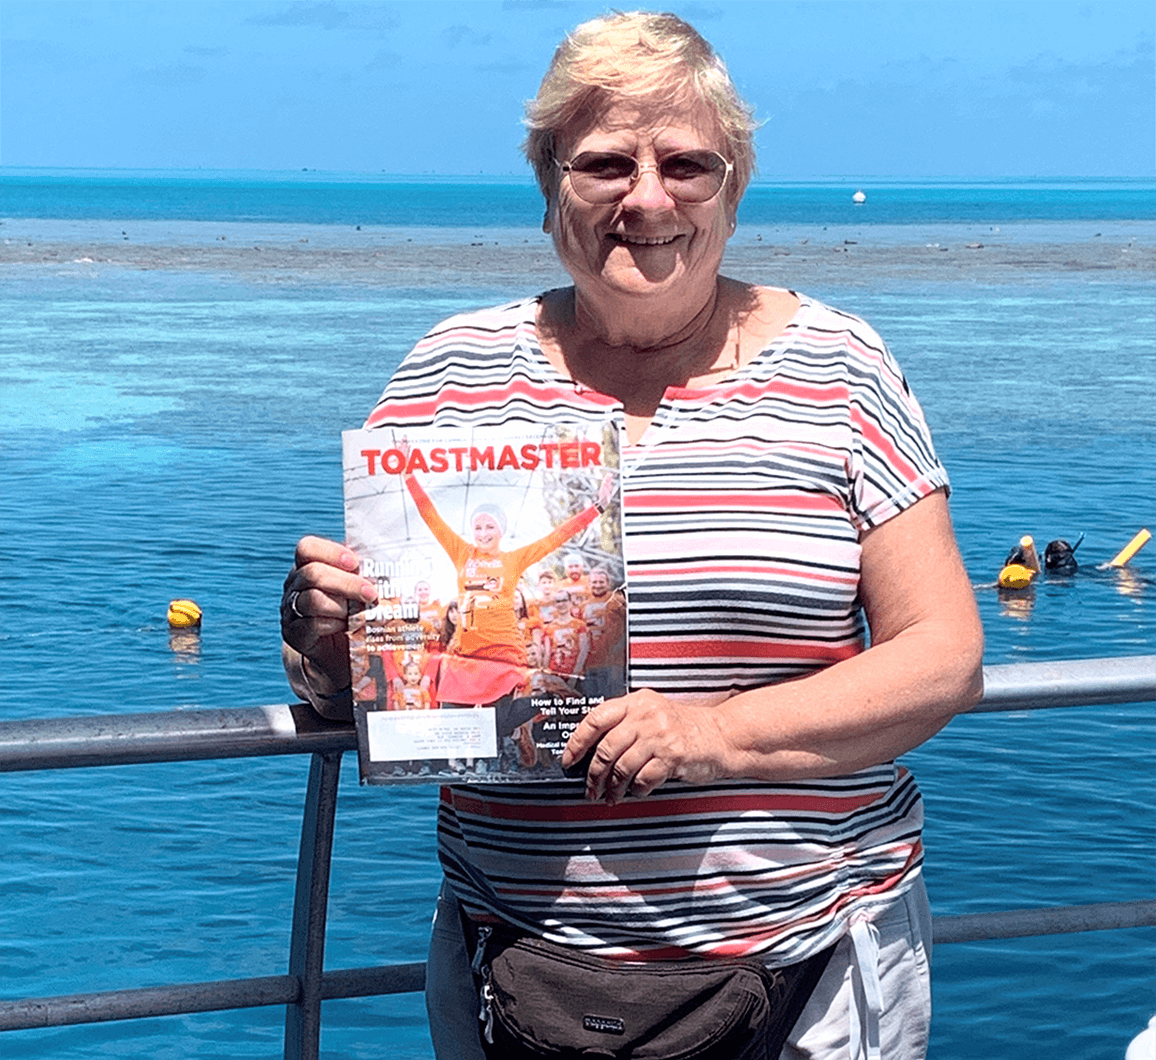 Mary Beganyi, DTM, of Las Vegas, Nevada, visits the Great Barrier Reef in Australia—the world’s largest coral reef system. She dreamed of visiting for years and was finally able to just before the COVID-19 pandemic.